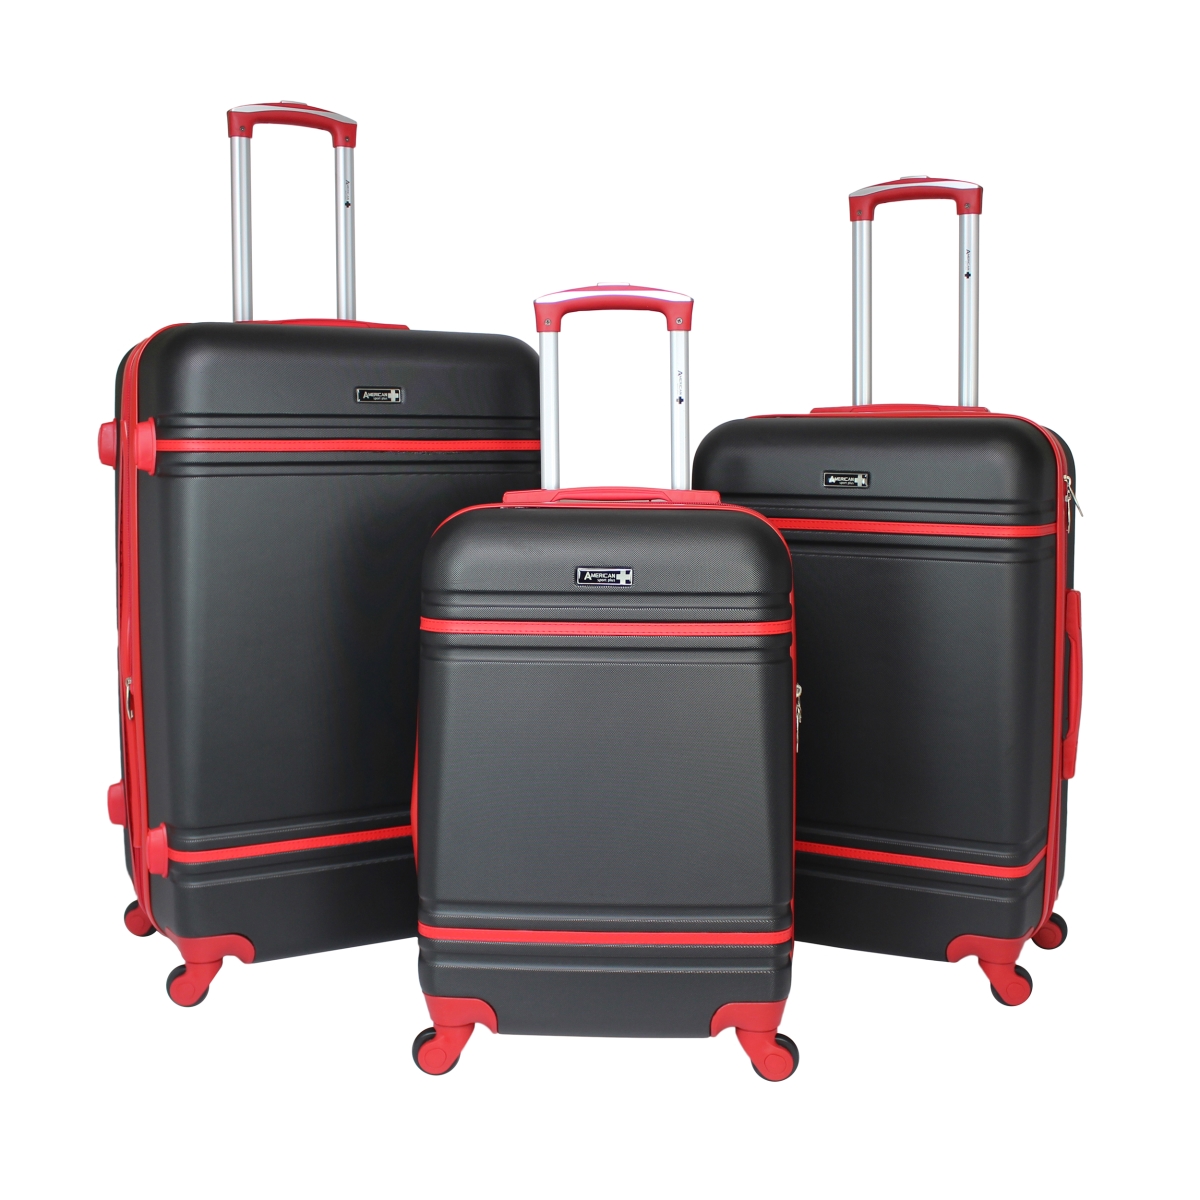 Wt86997-3e-blk-red 3 Piece American Collection Spinner Luggage Set - Black & Red